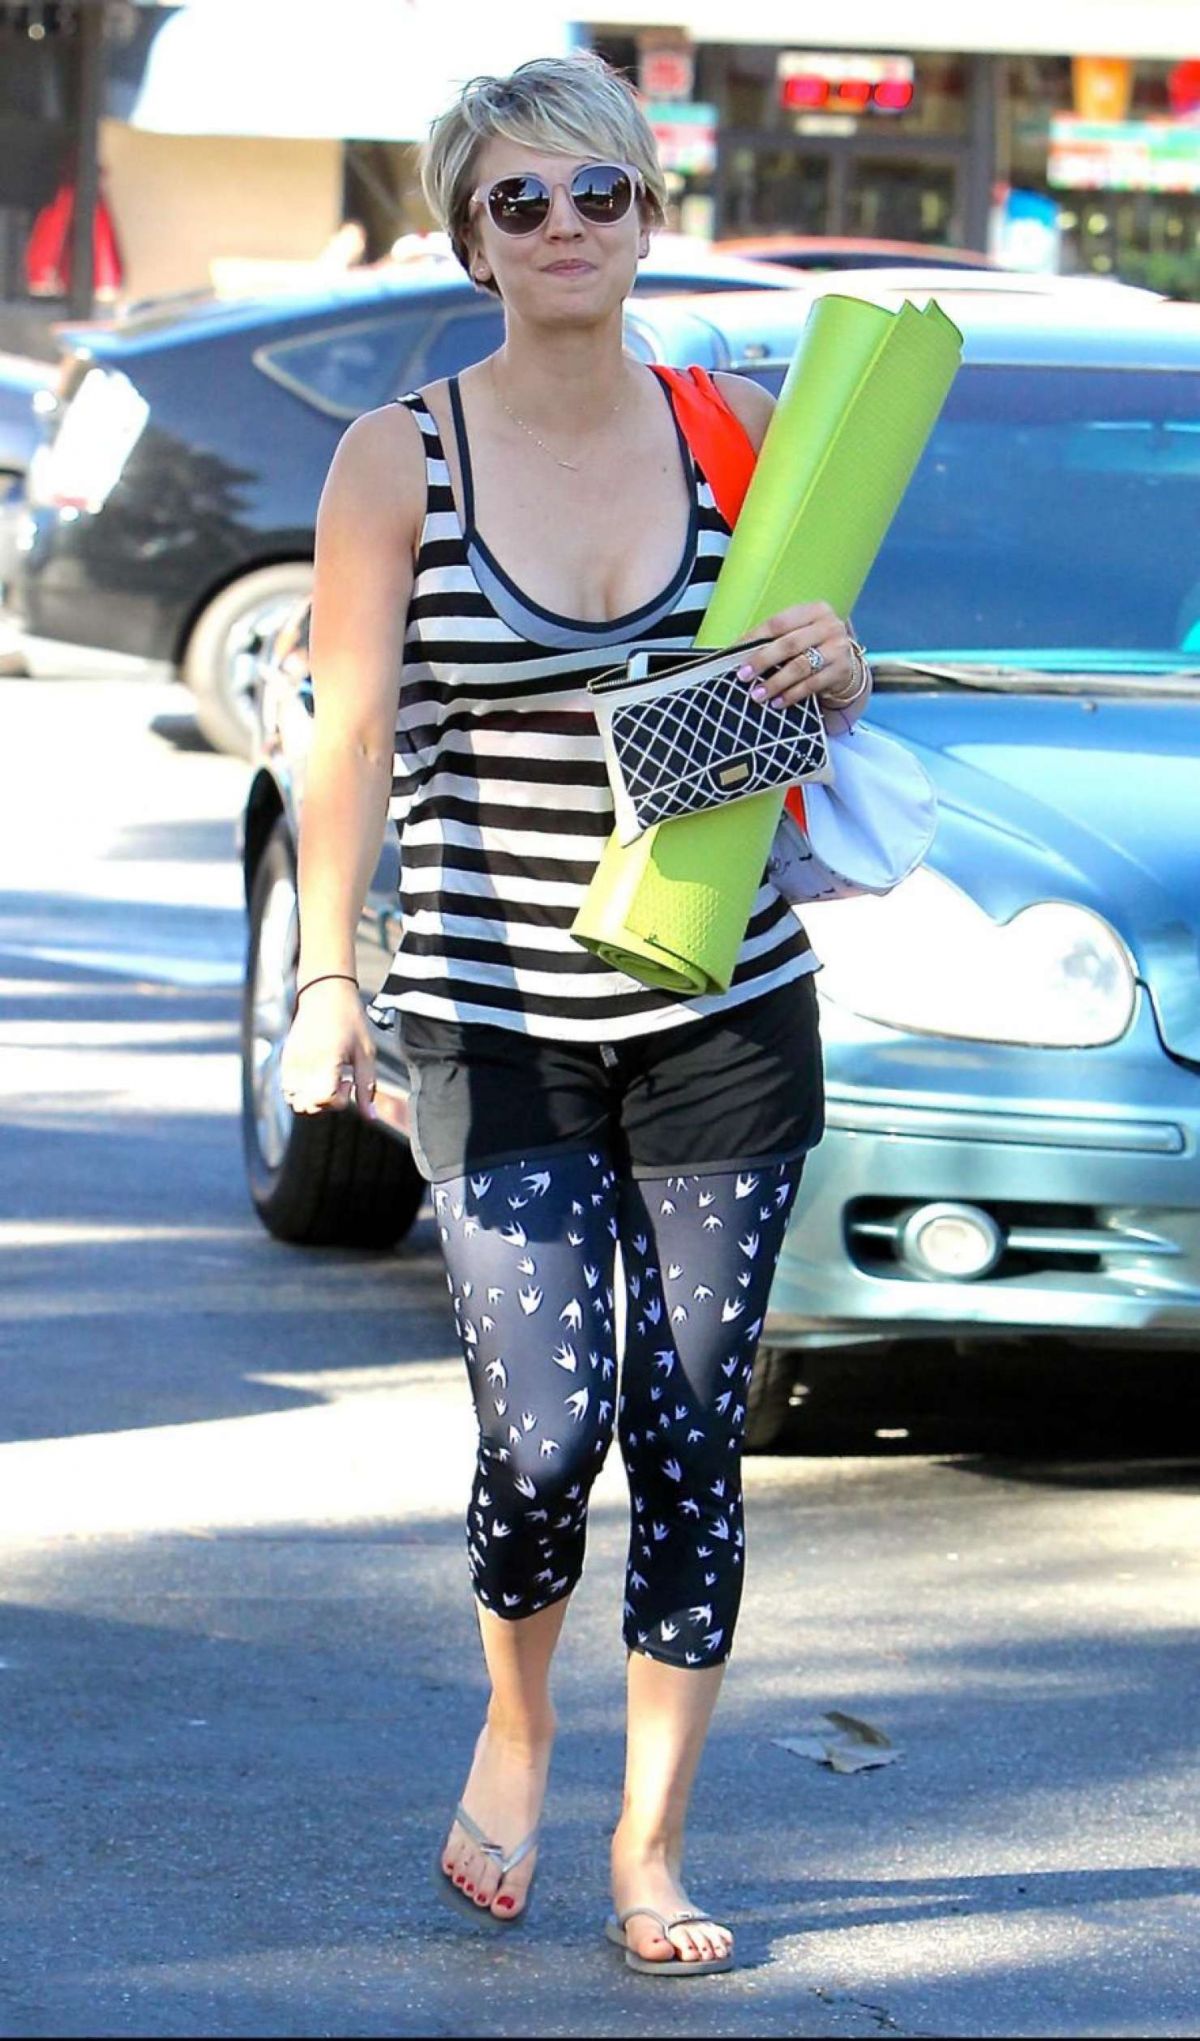 kaley-cuoco-in-leggings-heading-to-yoga-class-in-brentwood-0303_11.